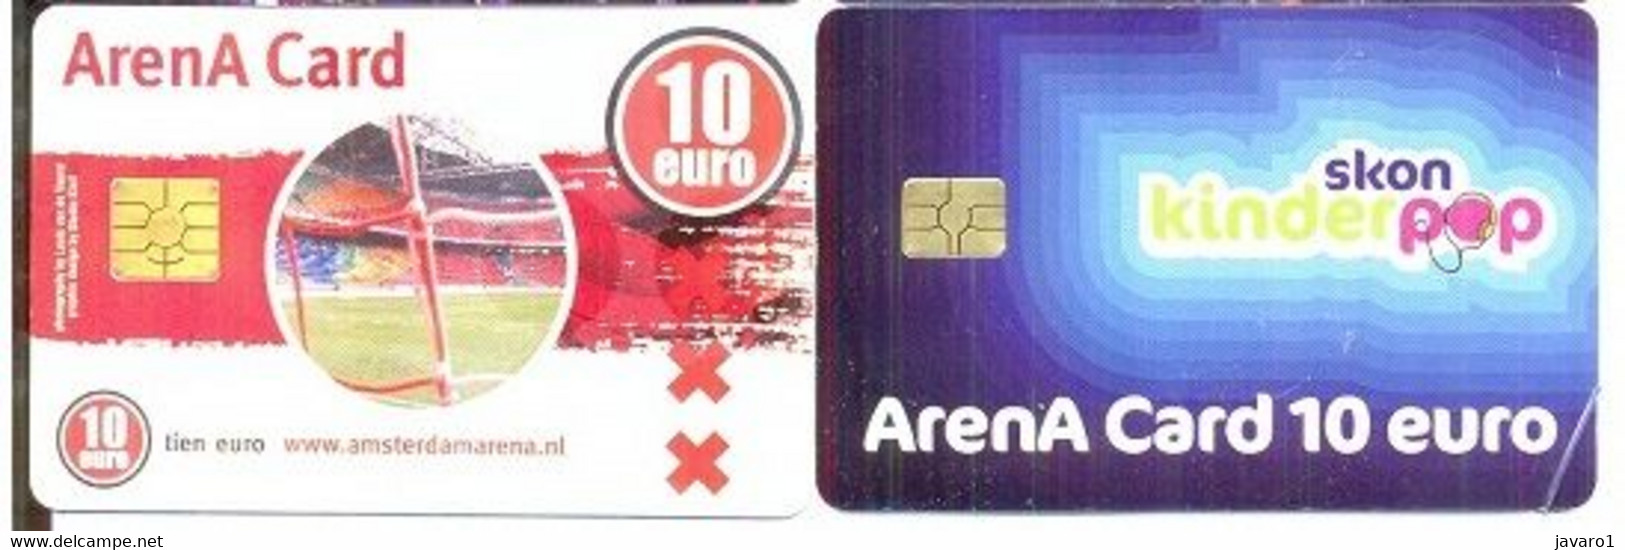 ARENA CARD : 2 Cards As Pictured - A Identificar